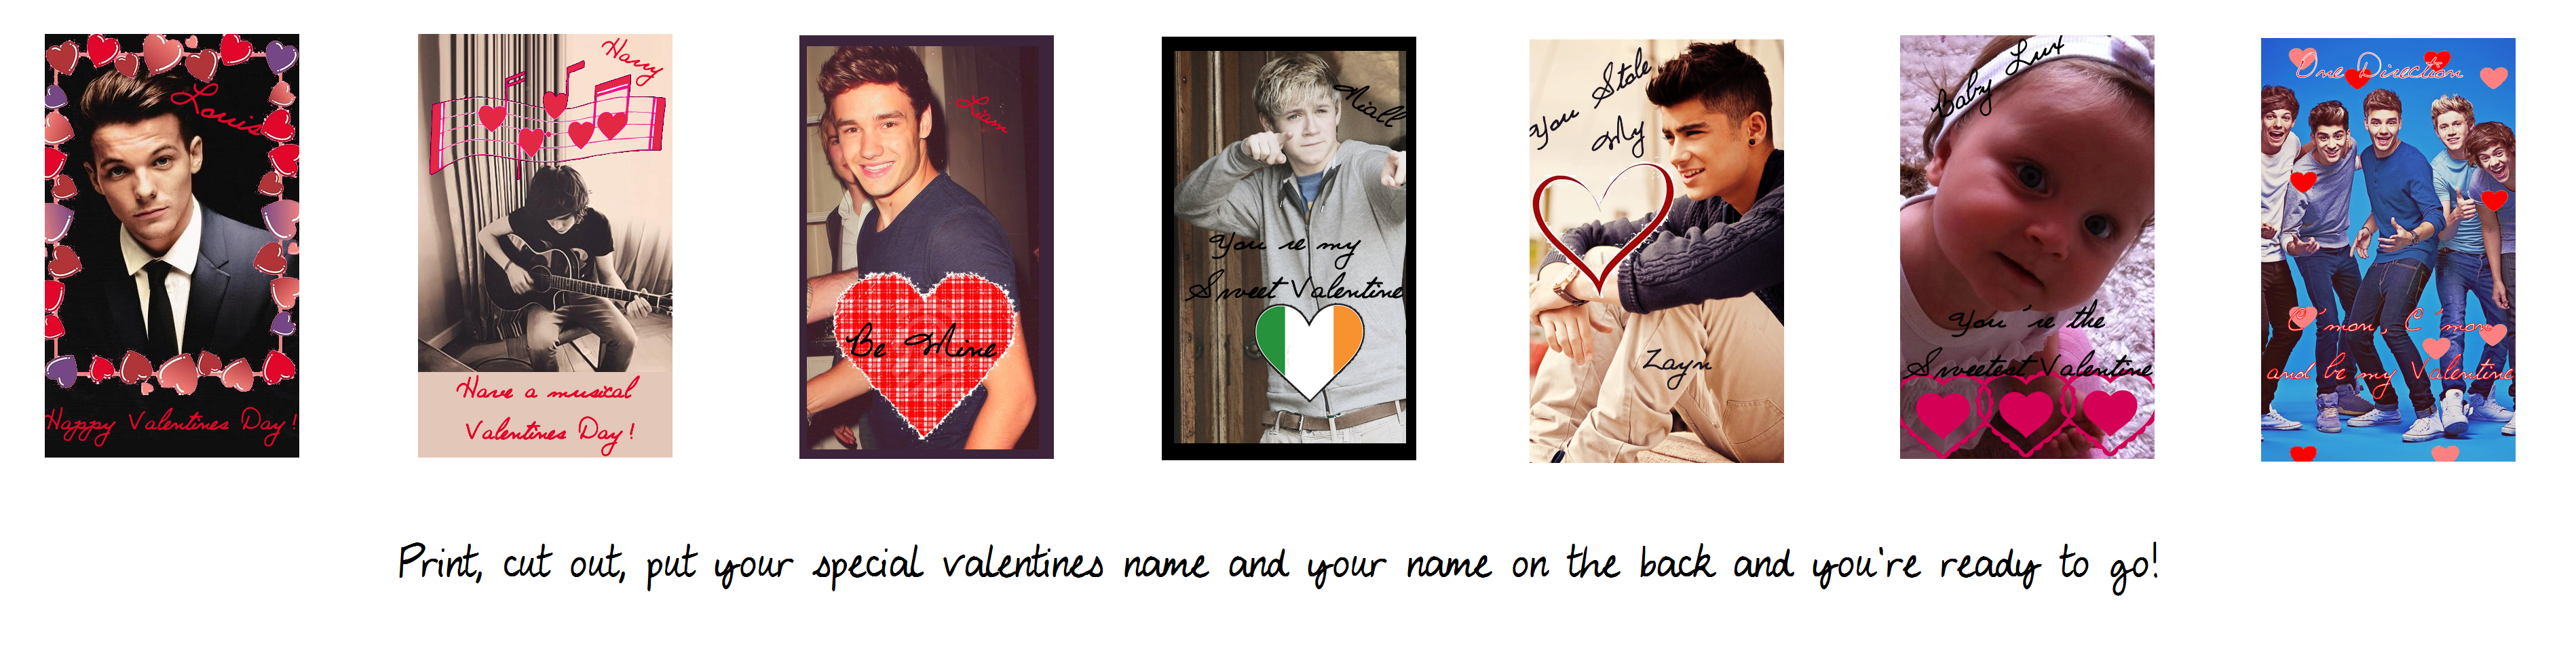 one-direction-valentines-day-cards-by-iluvlouis-on-deviantart